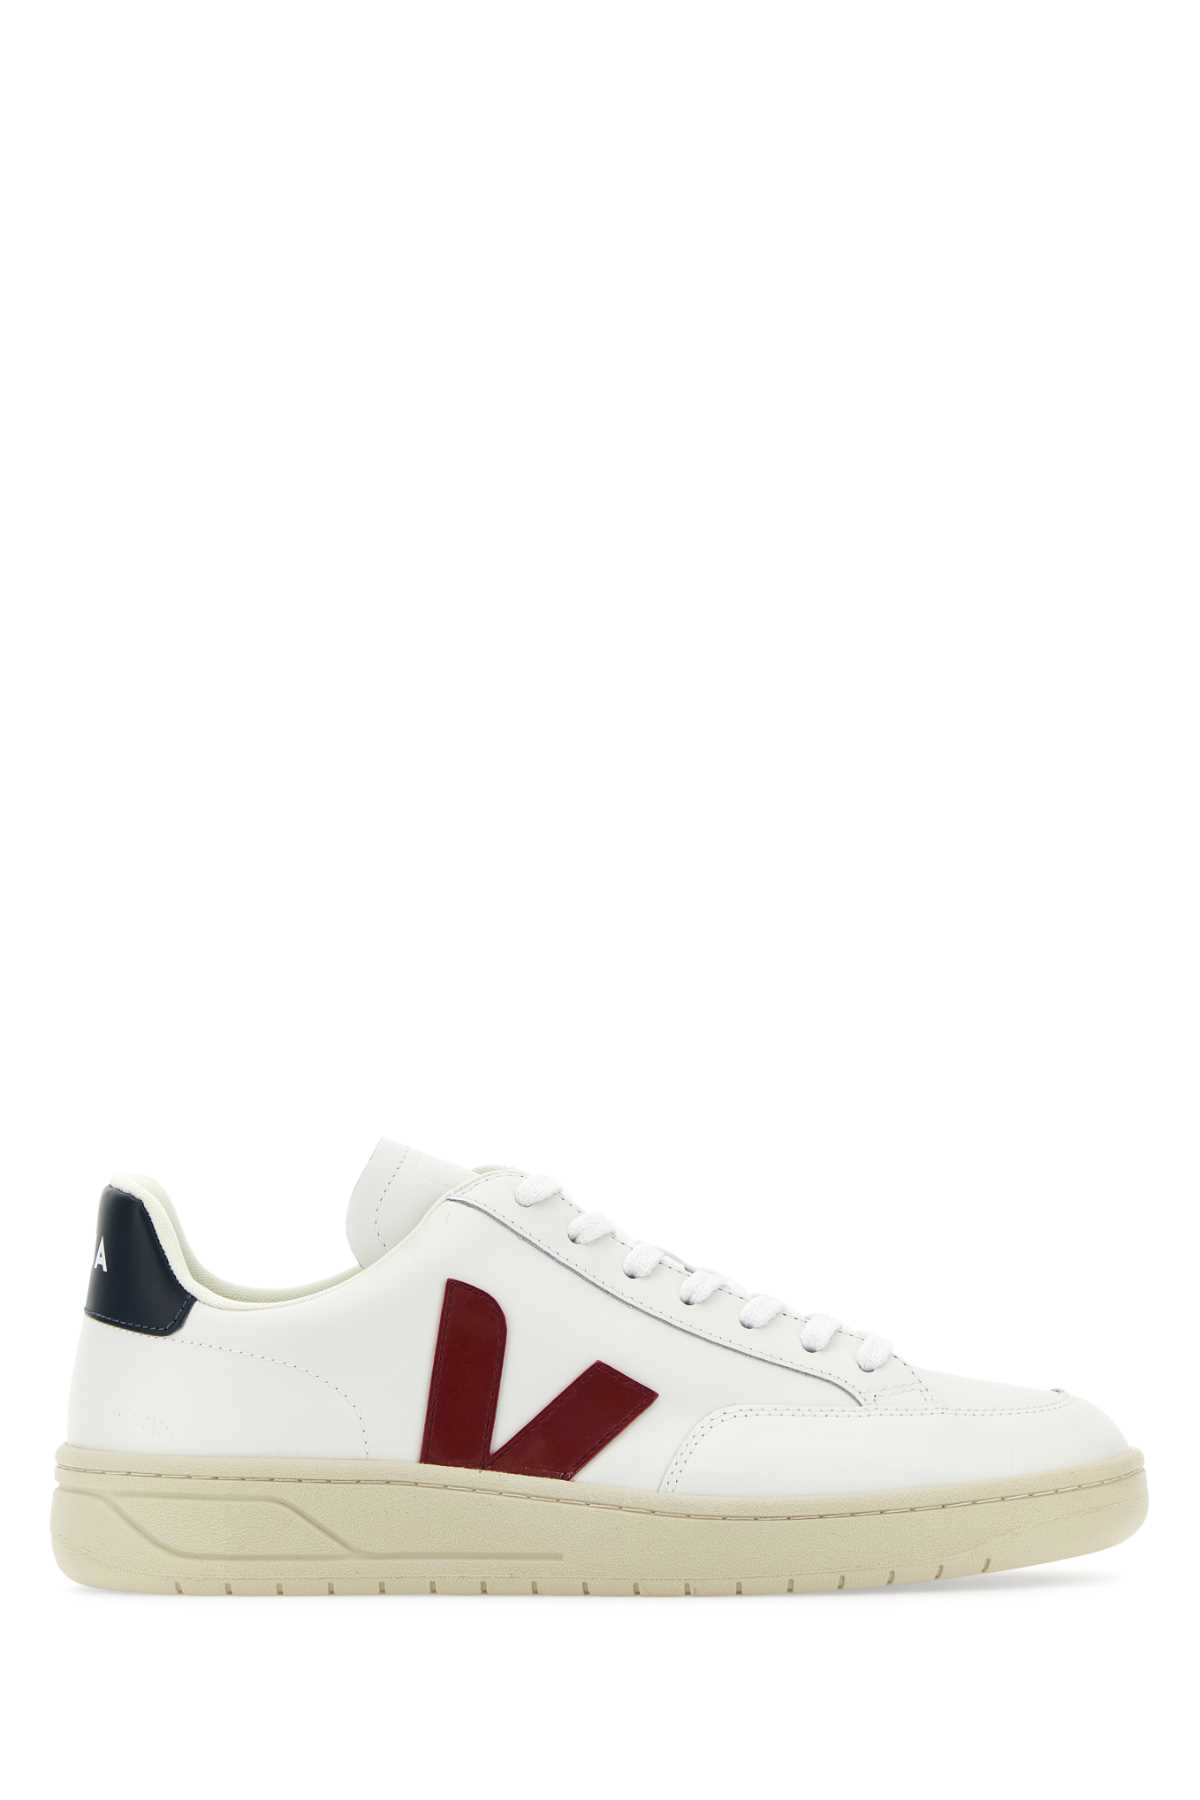 White Leather V-12 Sneakers